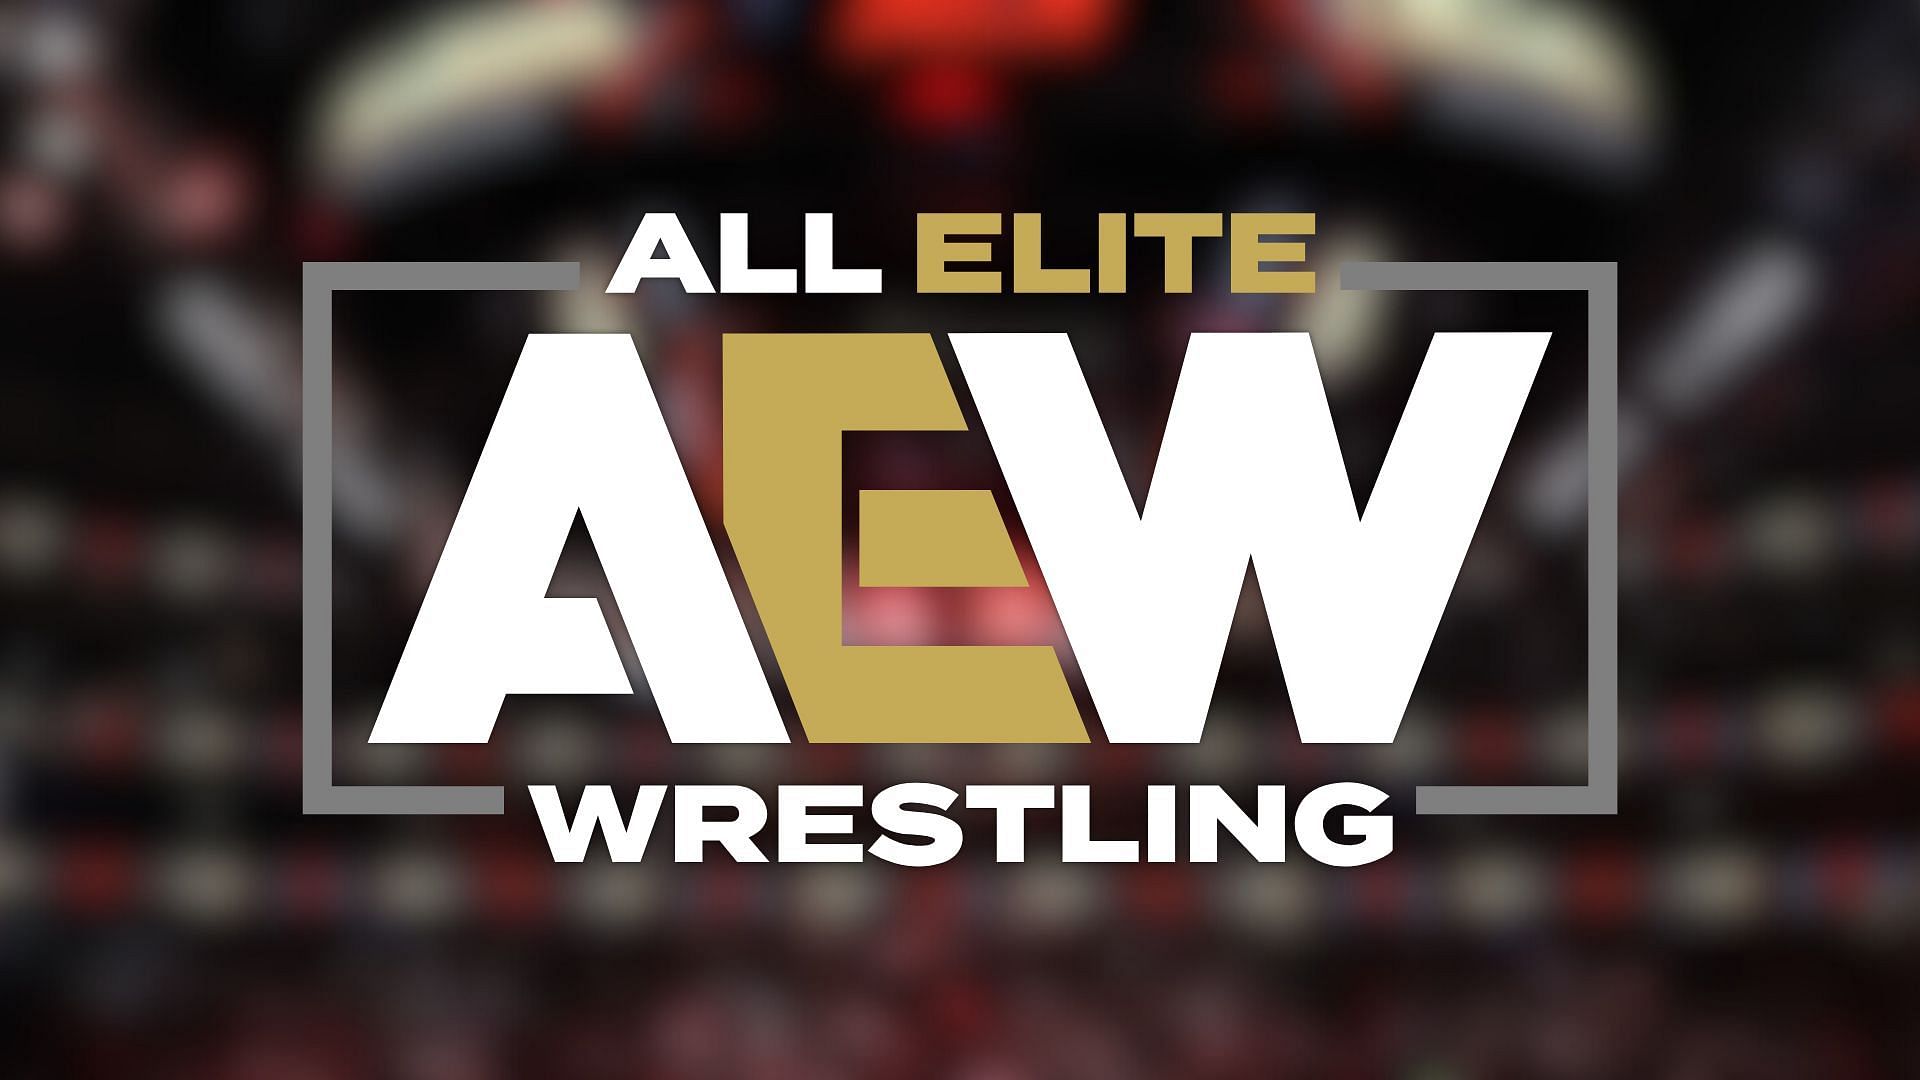 AEW could have some trouble on their hands in the near future